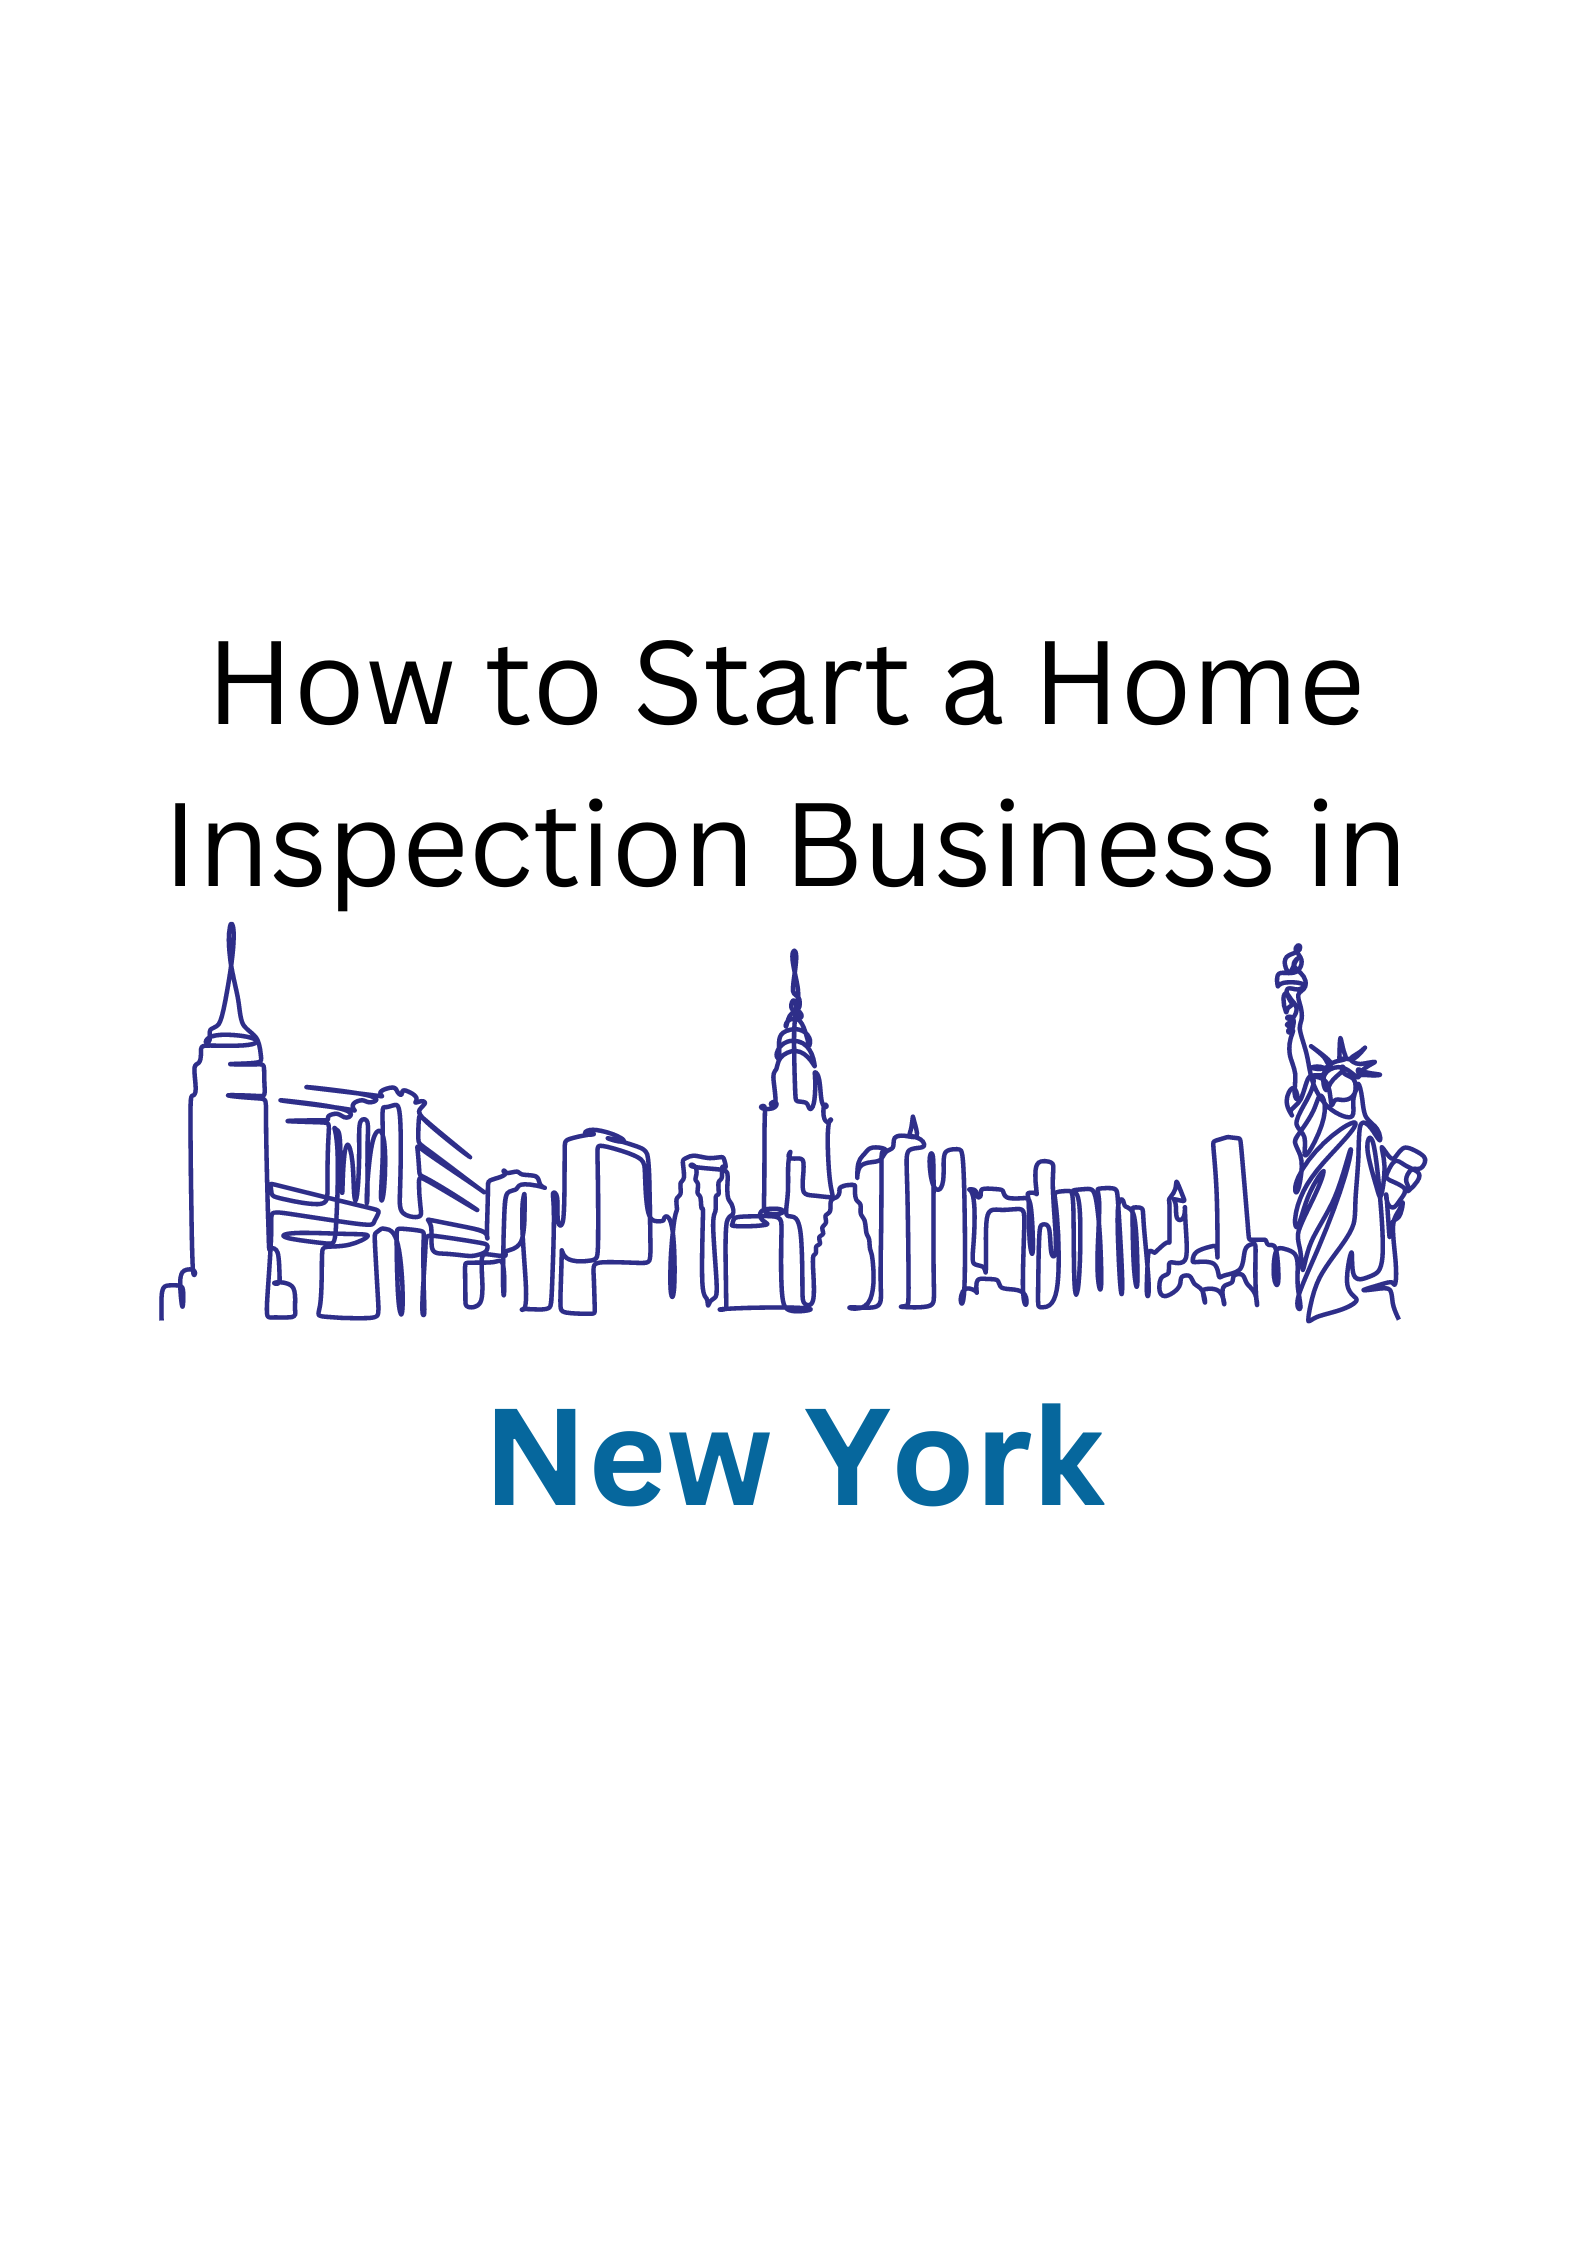 How to Start a Home Inspection Business in New York